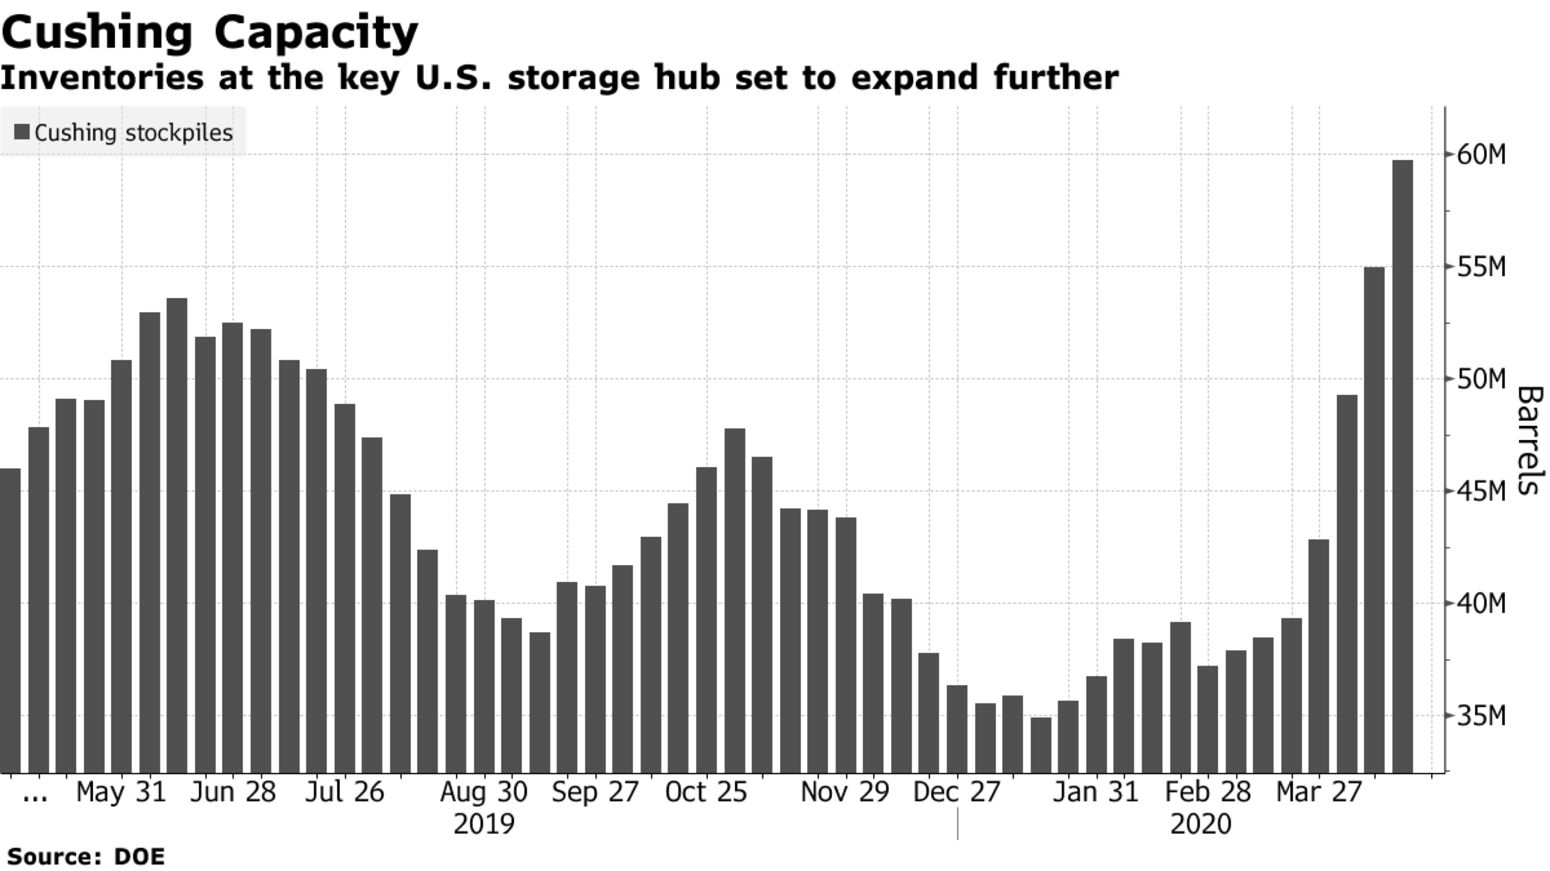 Inventories at the key U.S. storage hub set to expand further